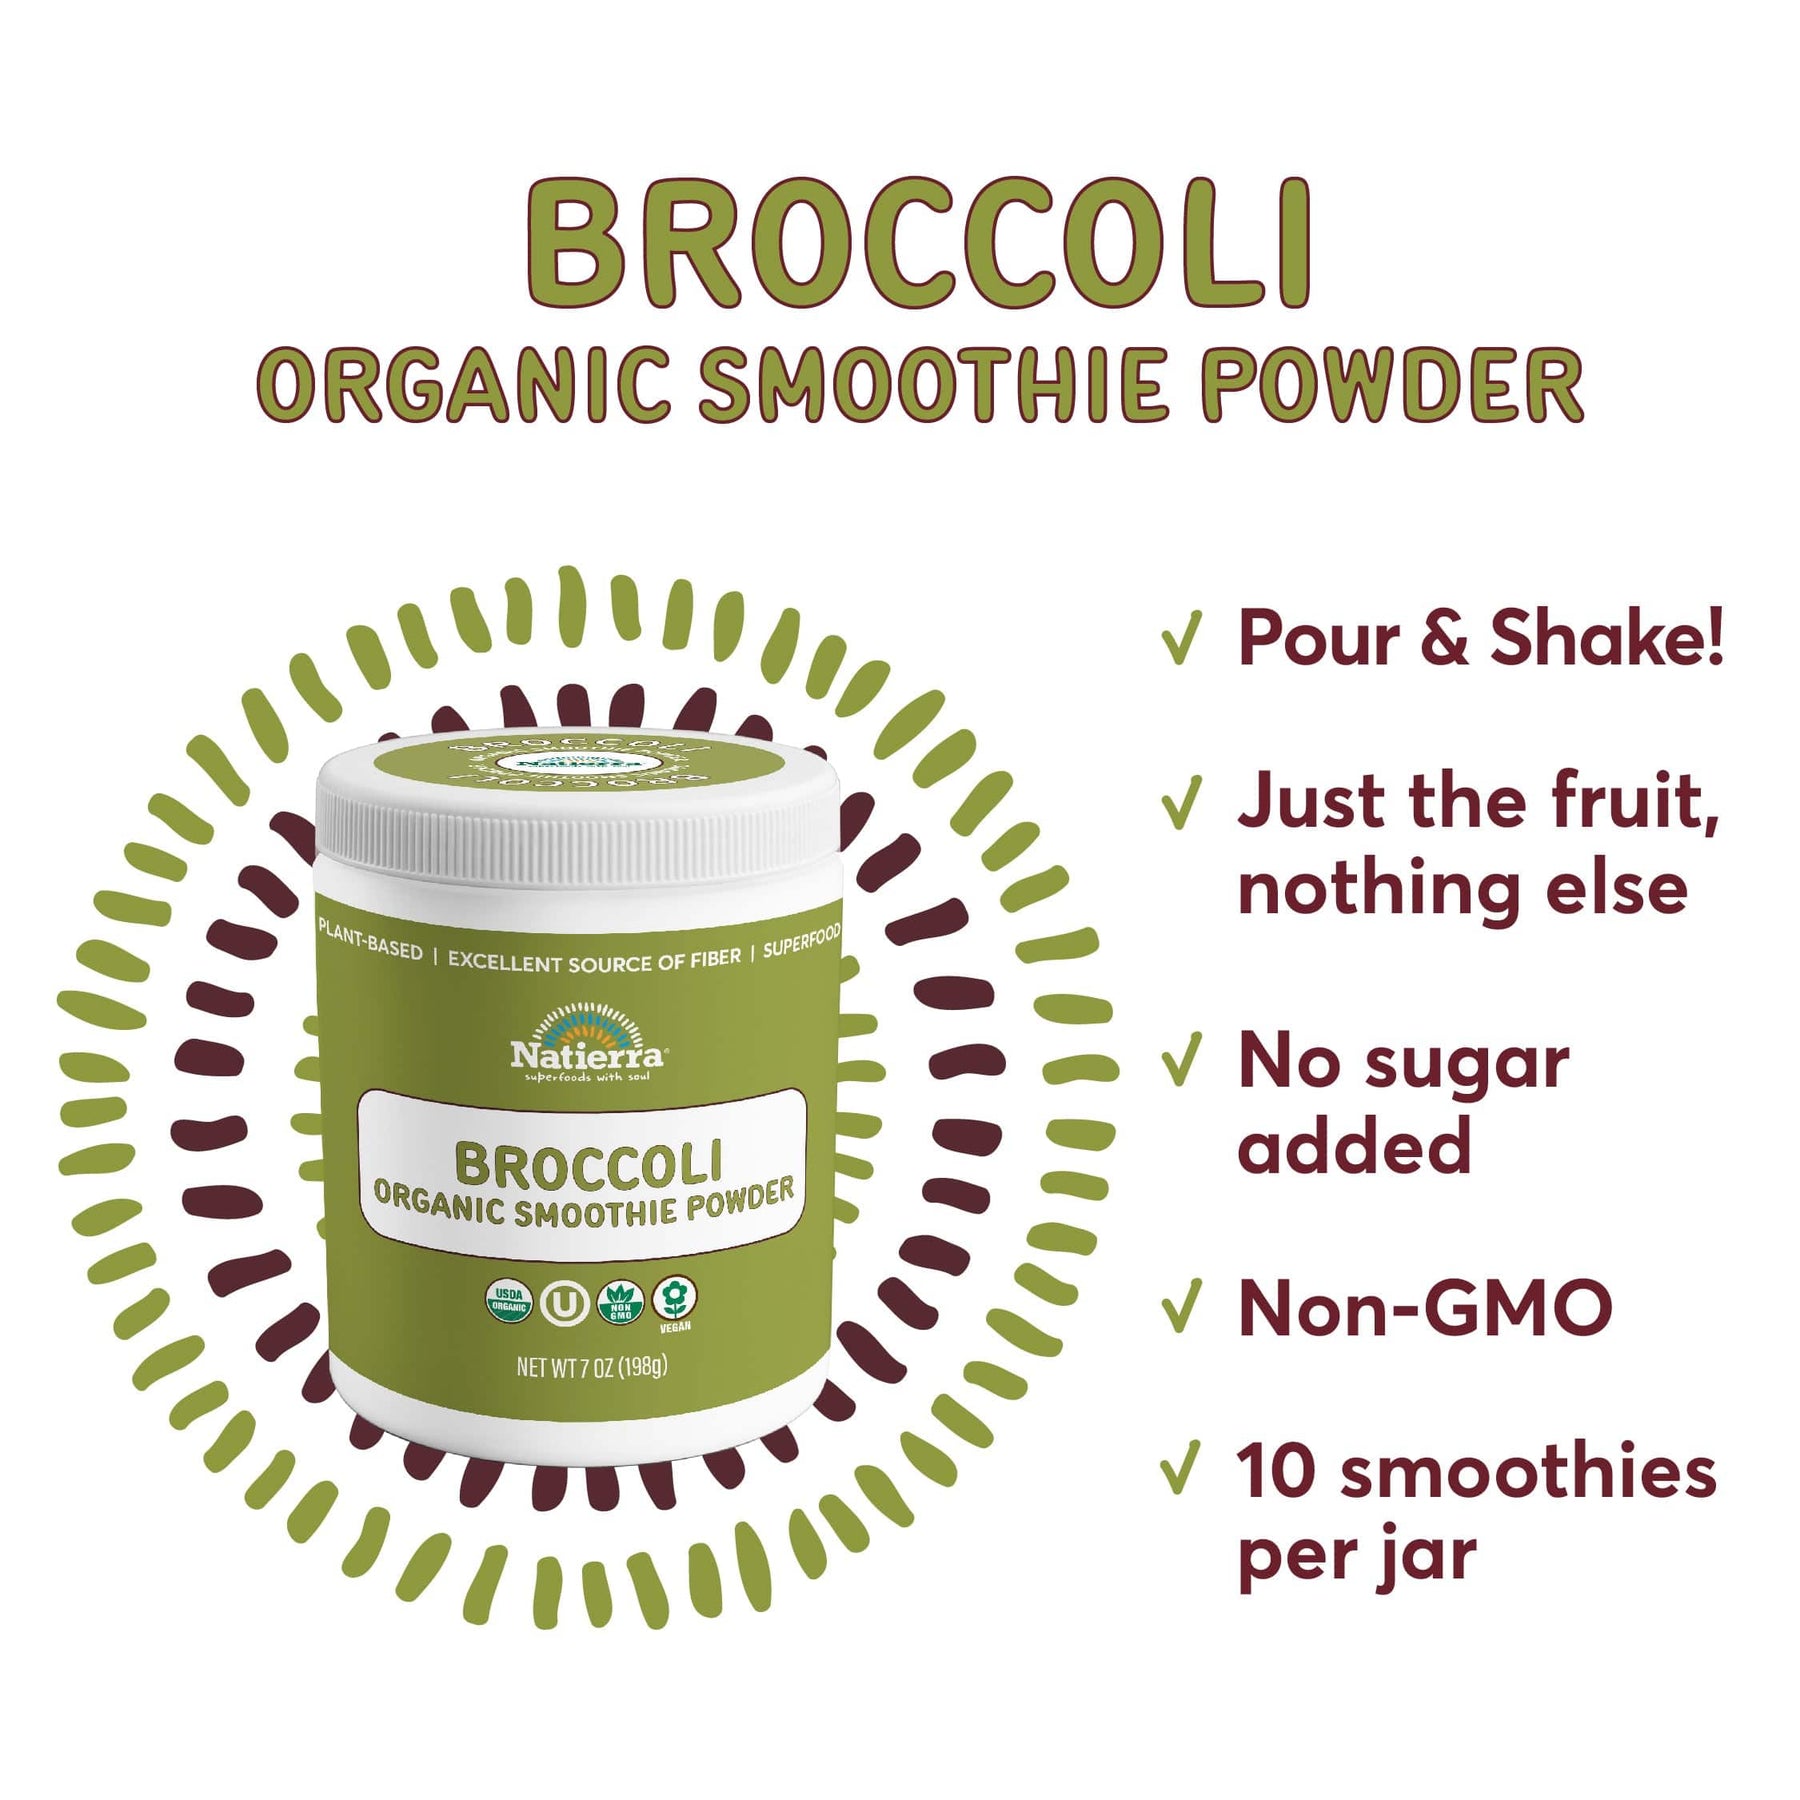 A jar of Natierra Brocoli Organic Smoothie Powder next to list of main product claims